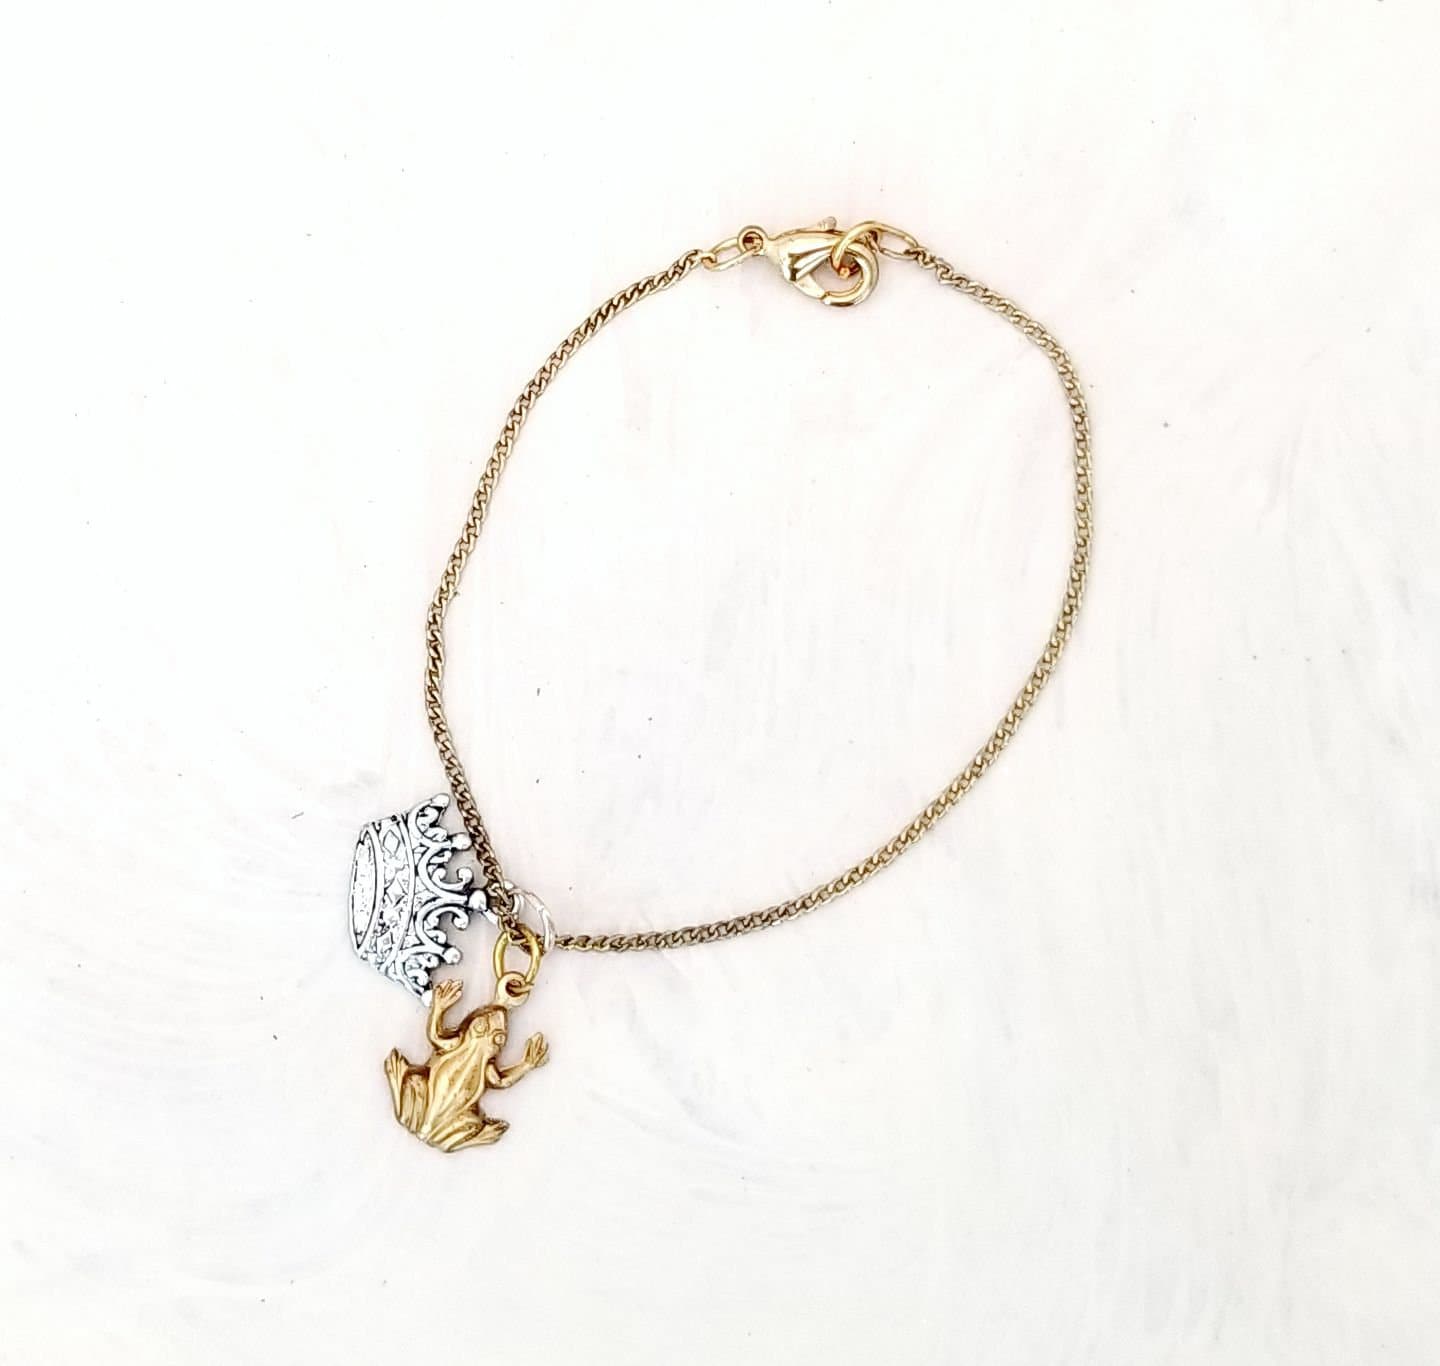 Frog Prince Fairytale Chain Bracelet, Antique Gold Color, with Brass Frog + Silver Crown, Lobster Clasp, 7.5 inches, 19 cm, Minimalist